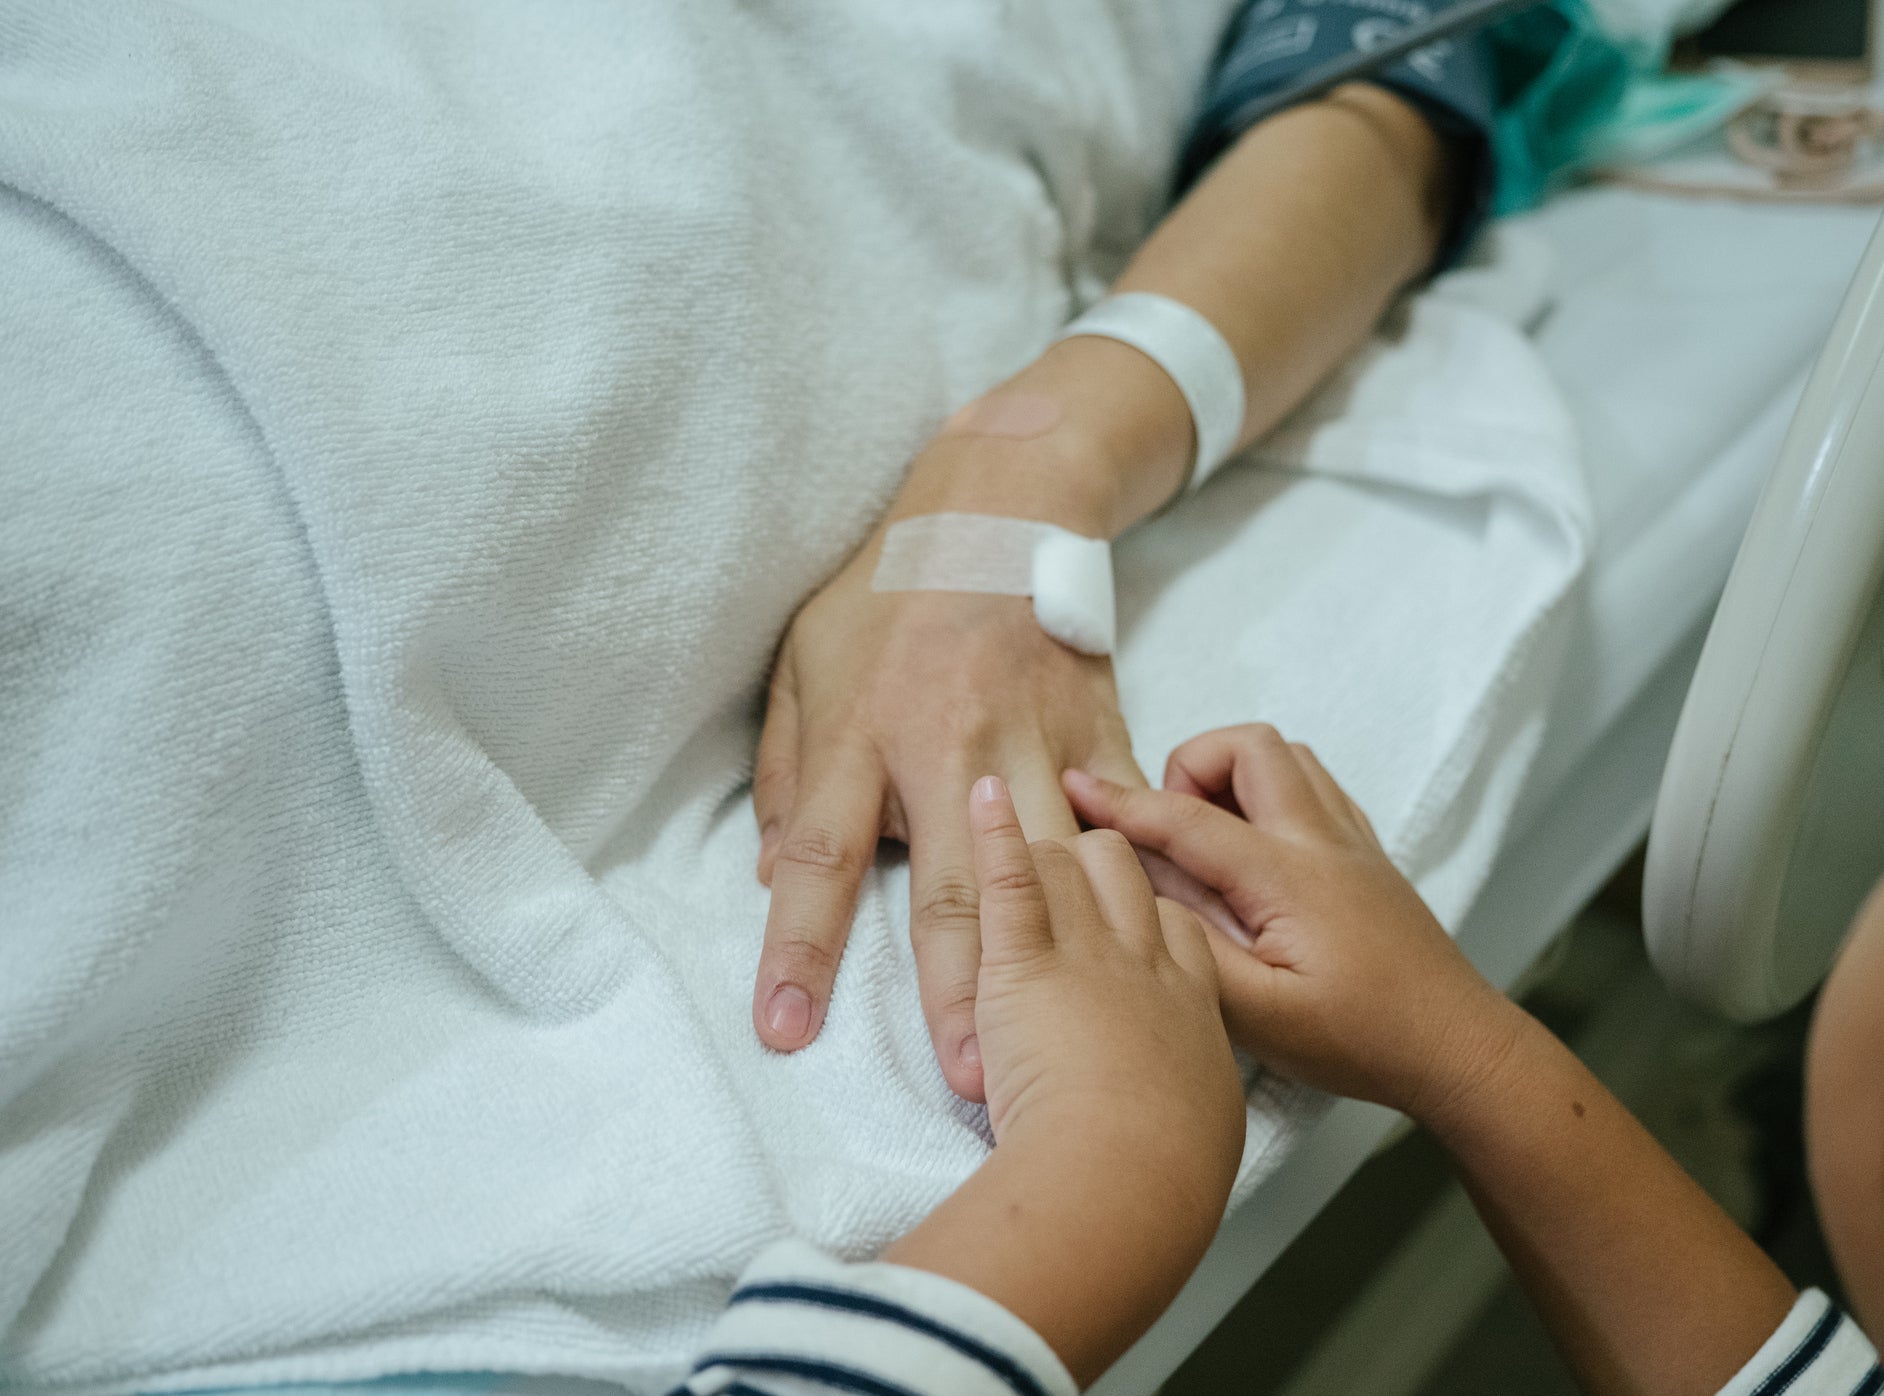 kids hands holding the hand of someone in a hospital bed